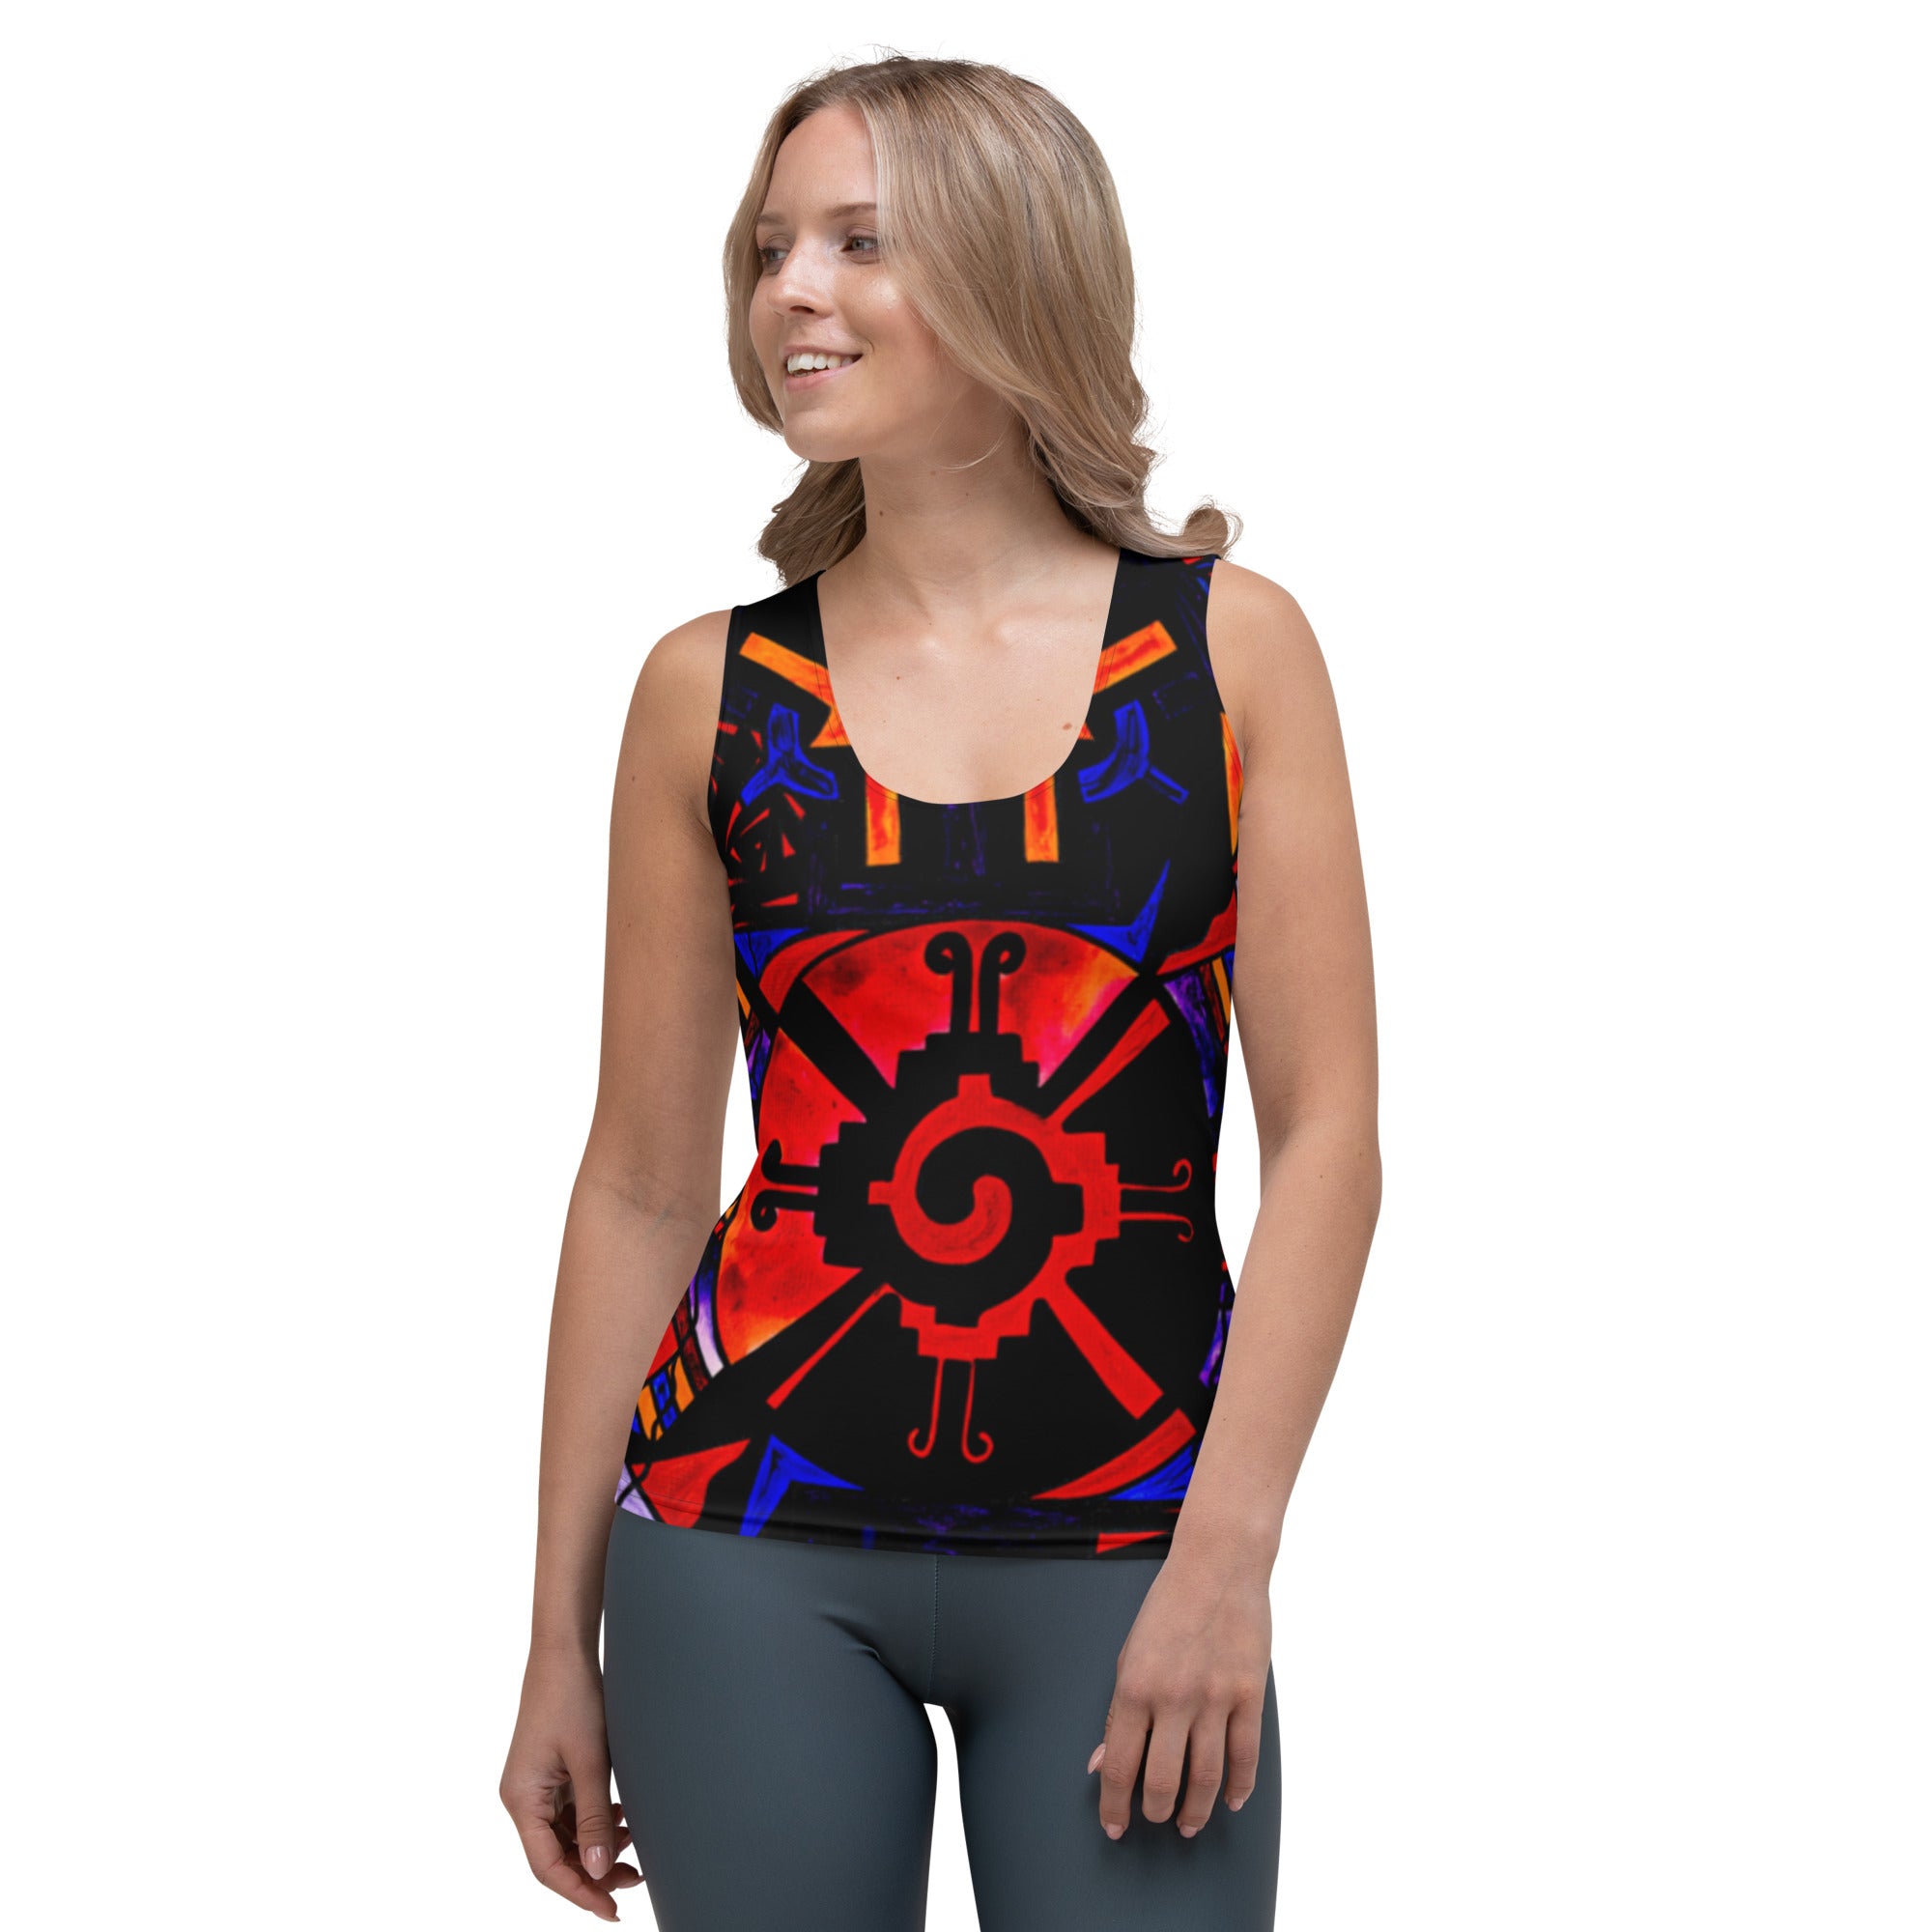 shop-our-official-alnilam-strength-grid-sublimation-cut-sew-tank-top-online-hot-sale_0.jpg